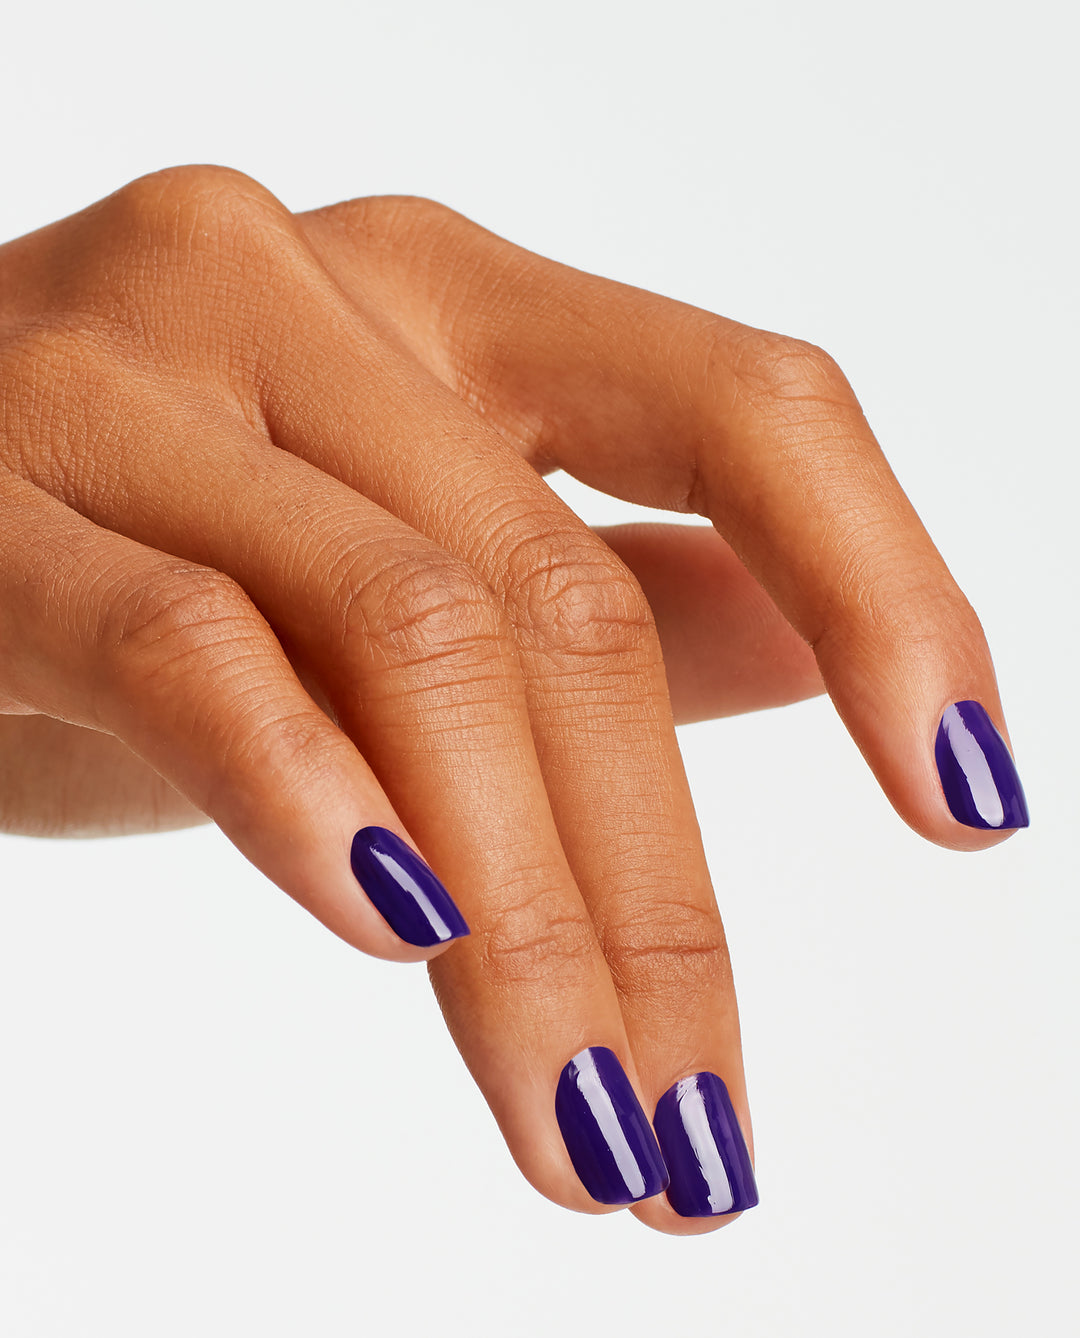 OPI Do You Have this Color in Stock-holm? Purple Dipping Powder Mani